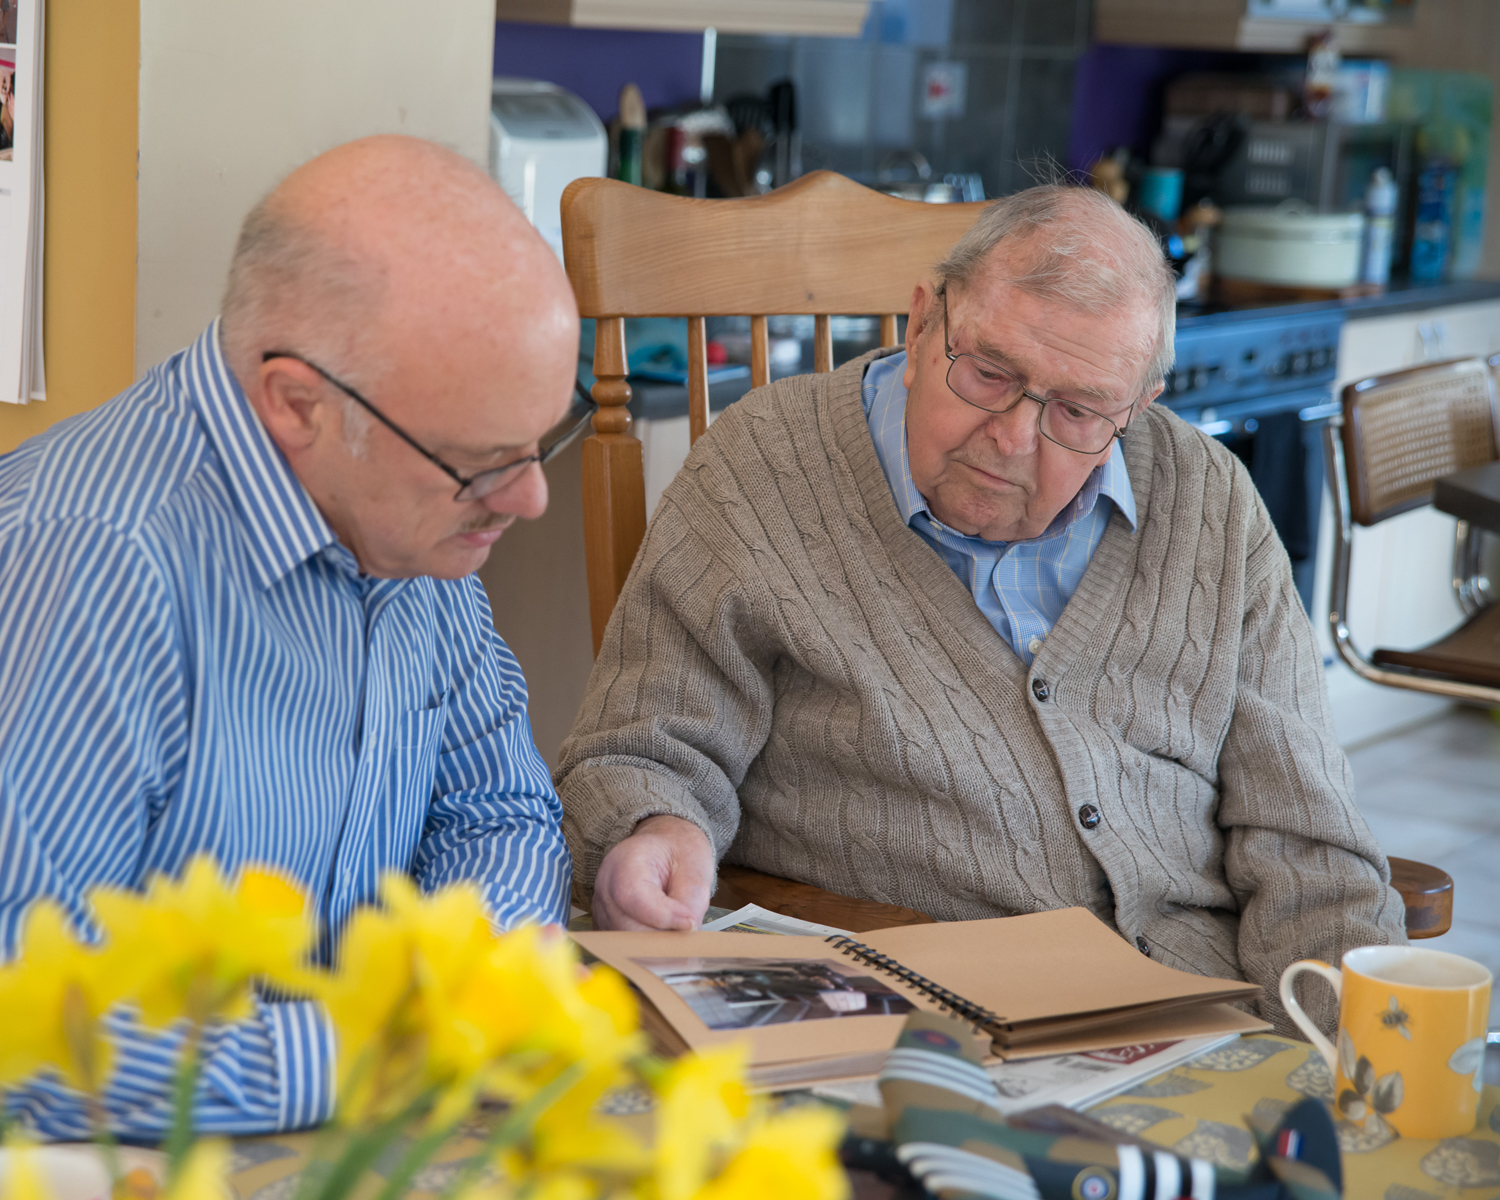 RAF Charity Seeks to Tackle Loneliness